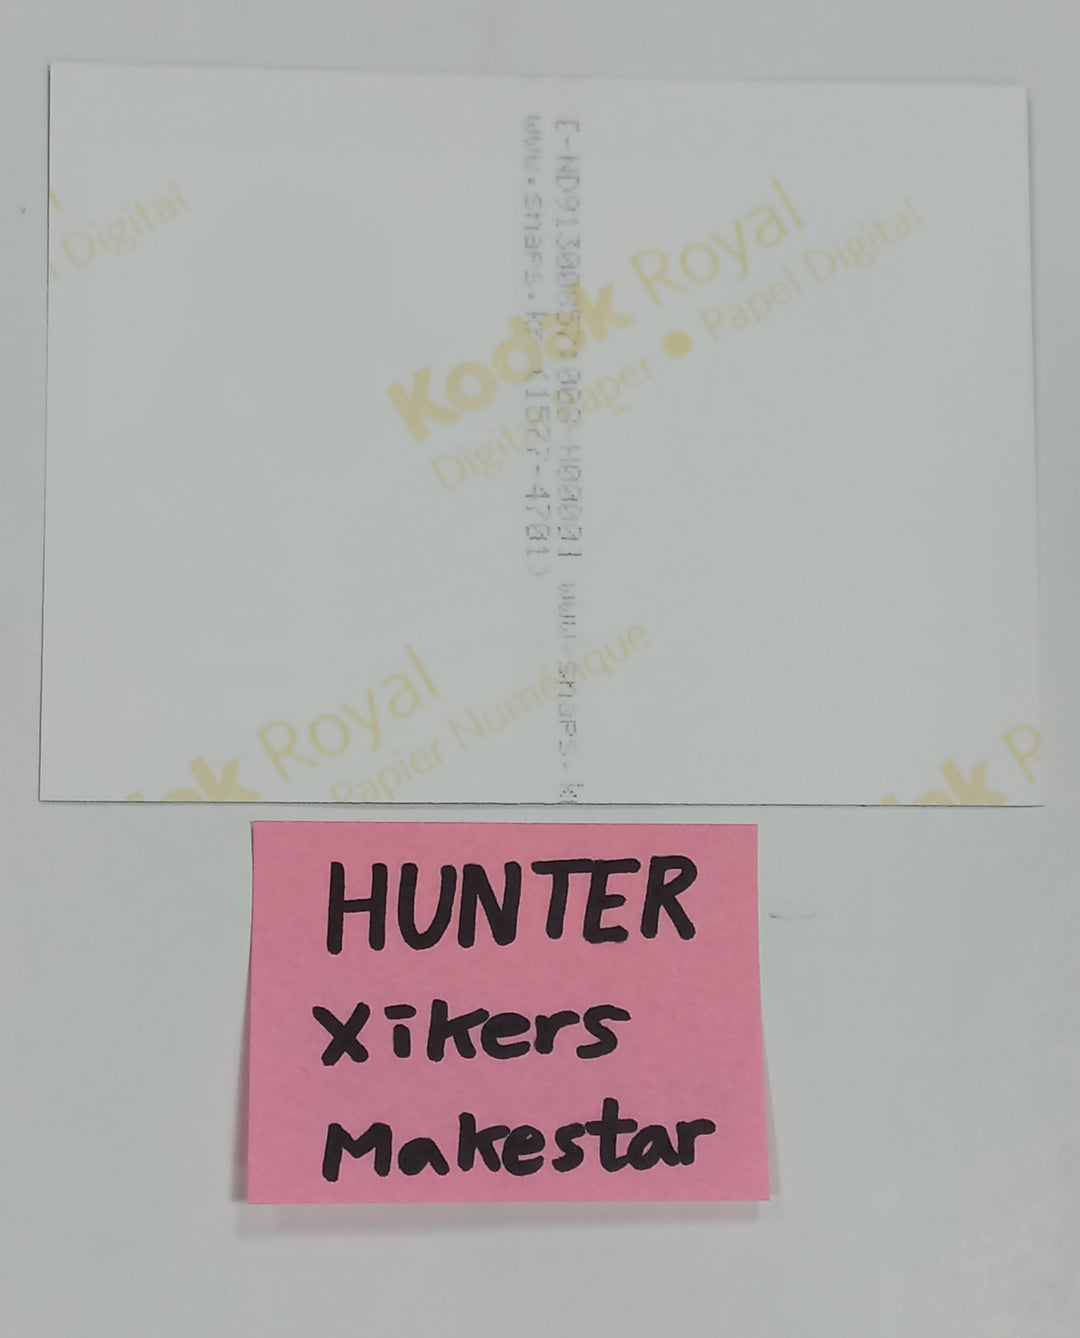 HUNTER (Of Xikers) "HOUSE OF TRICKY : How to Play" - Makestar Fansign Event 2 Cut Photo [23.09.25]